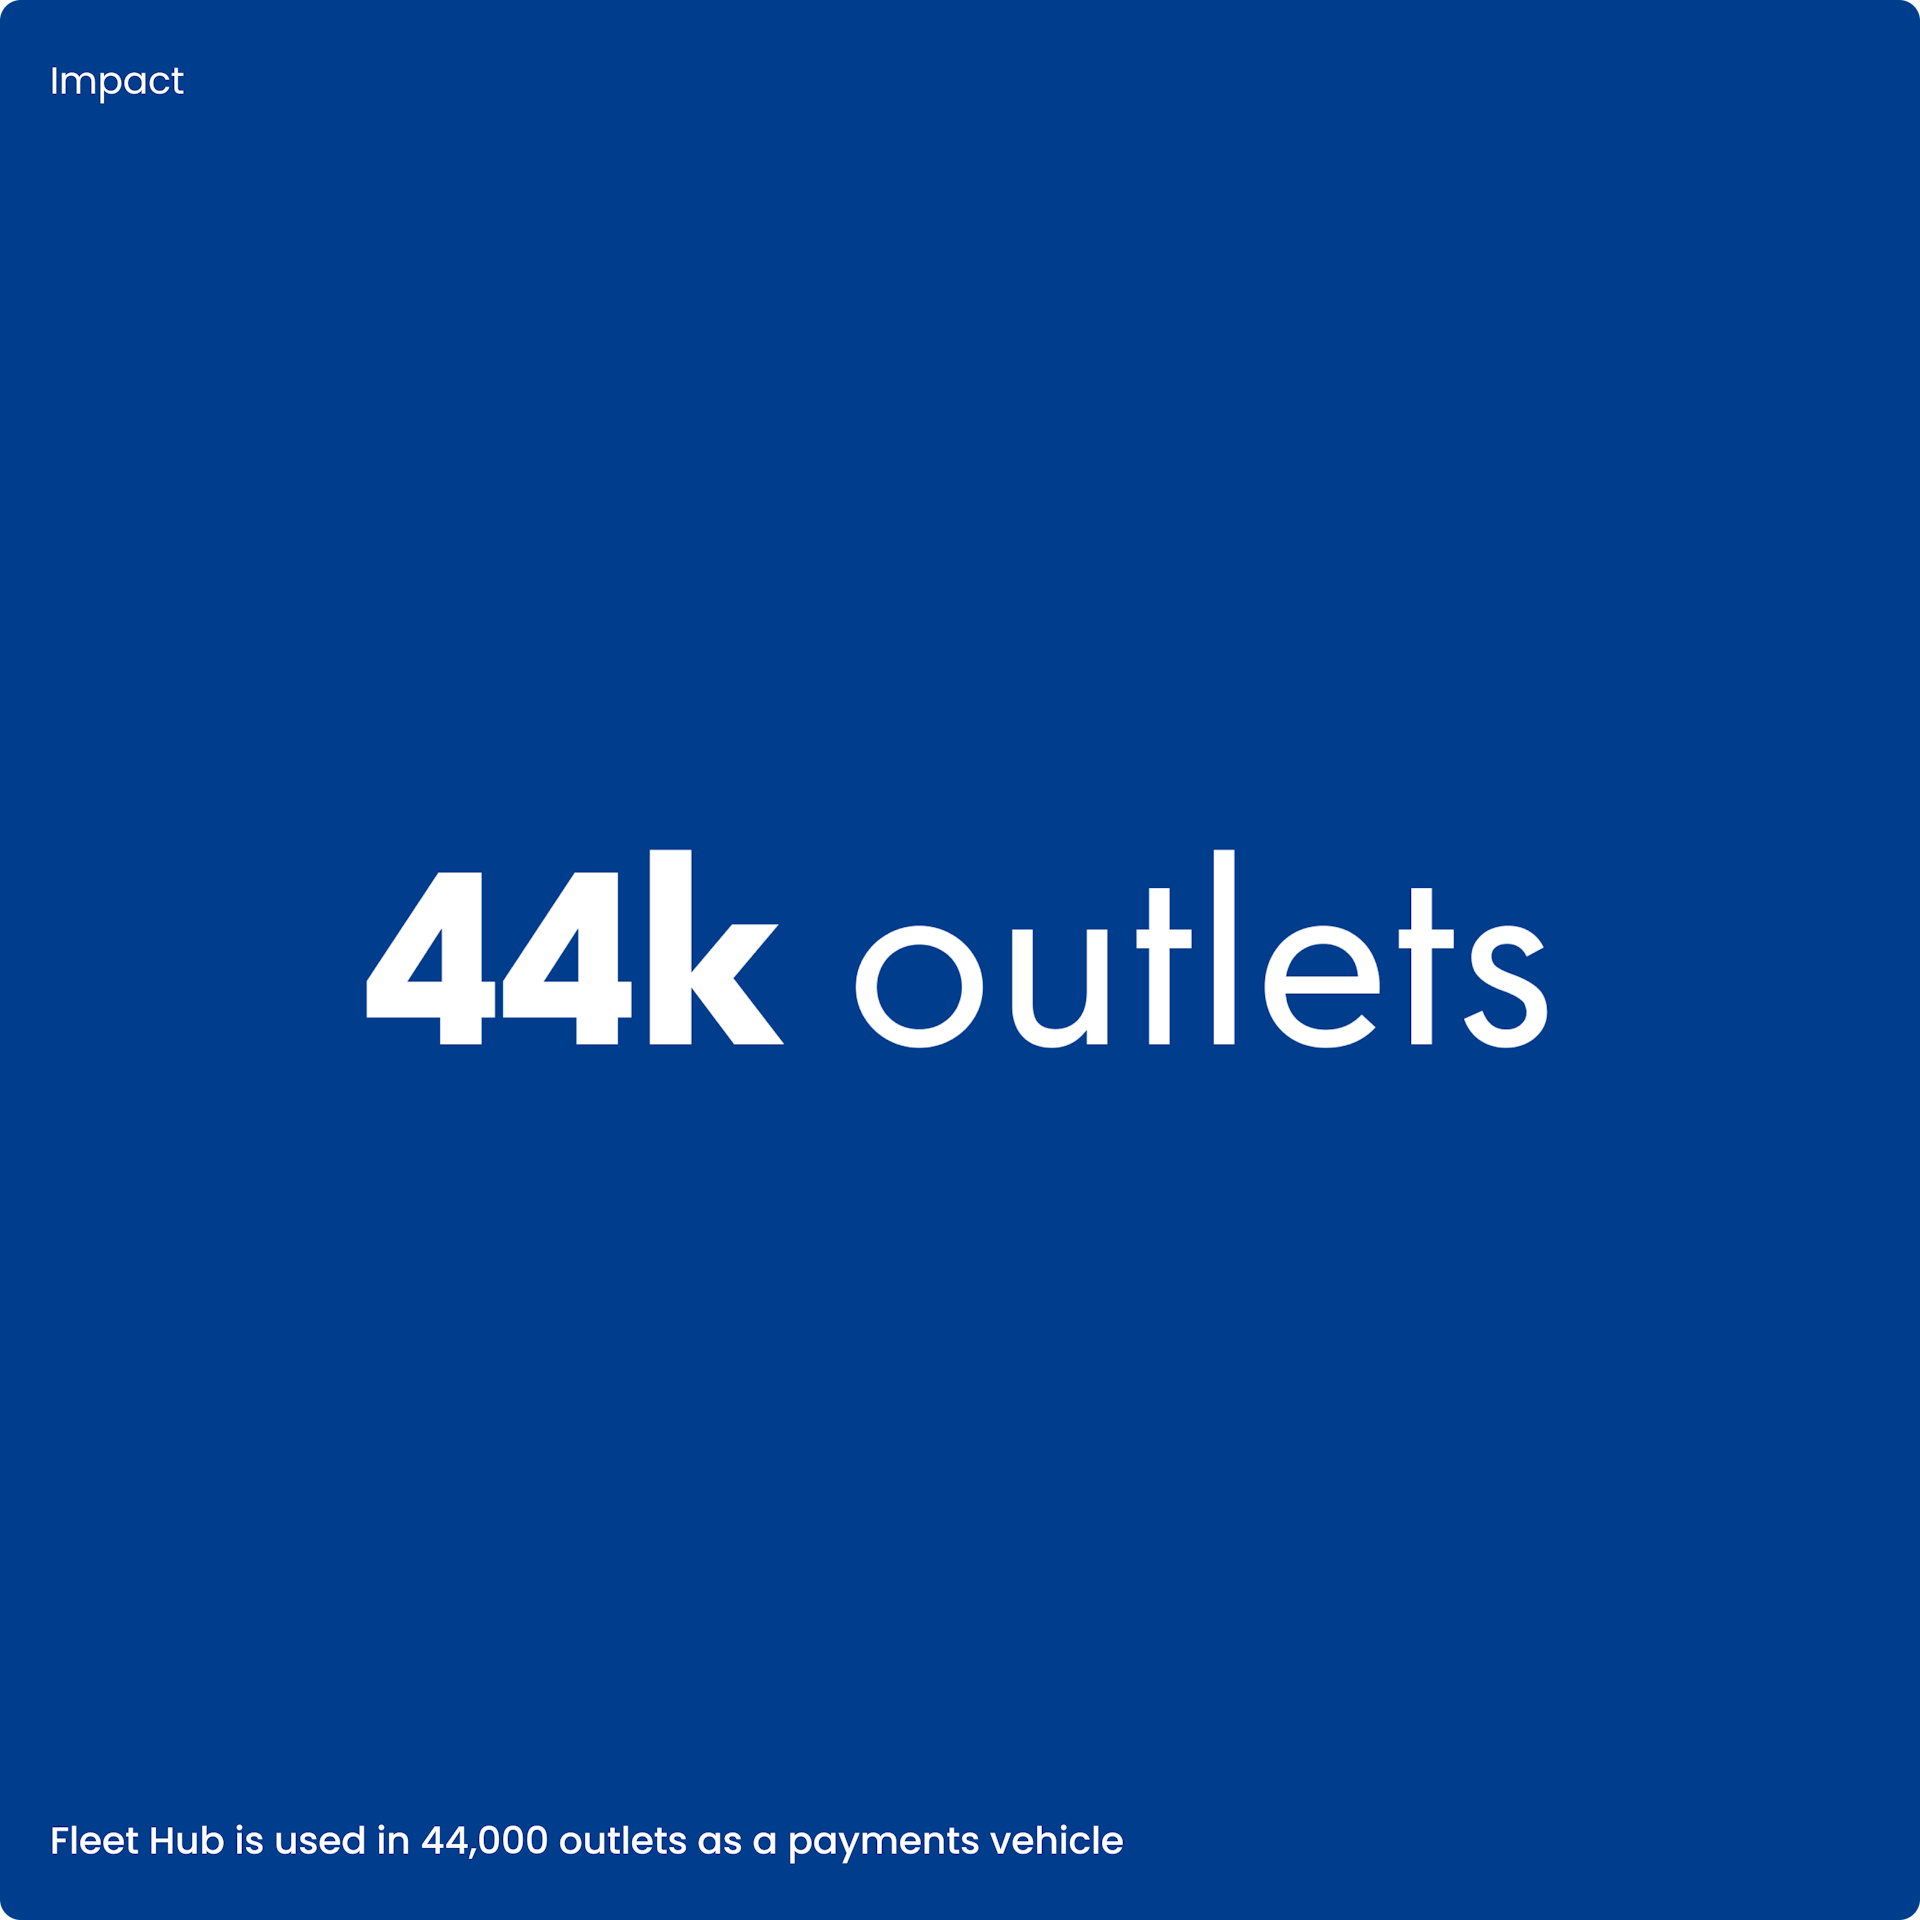 On a blue background, white letters say "44k outlets"